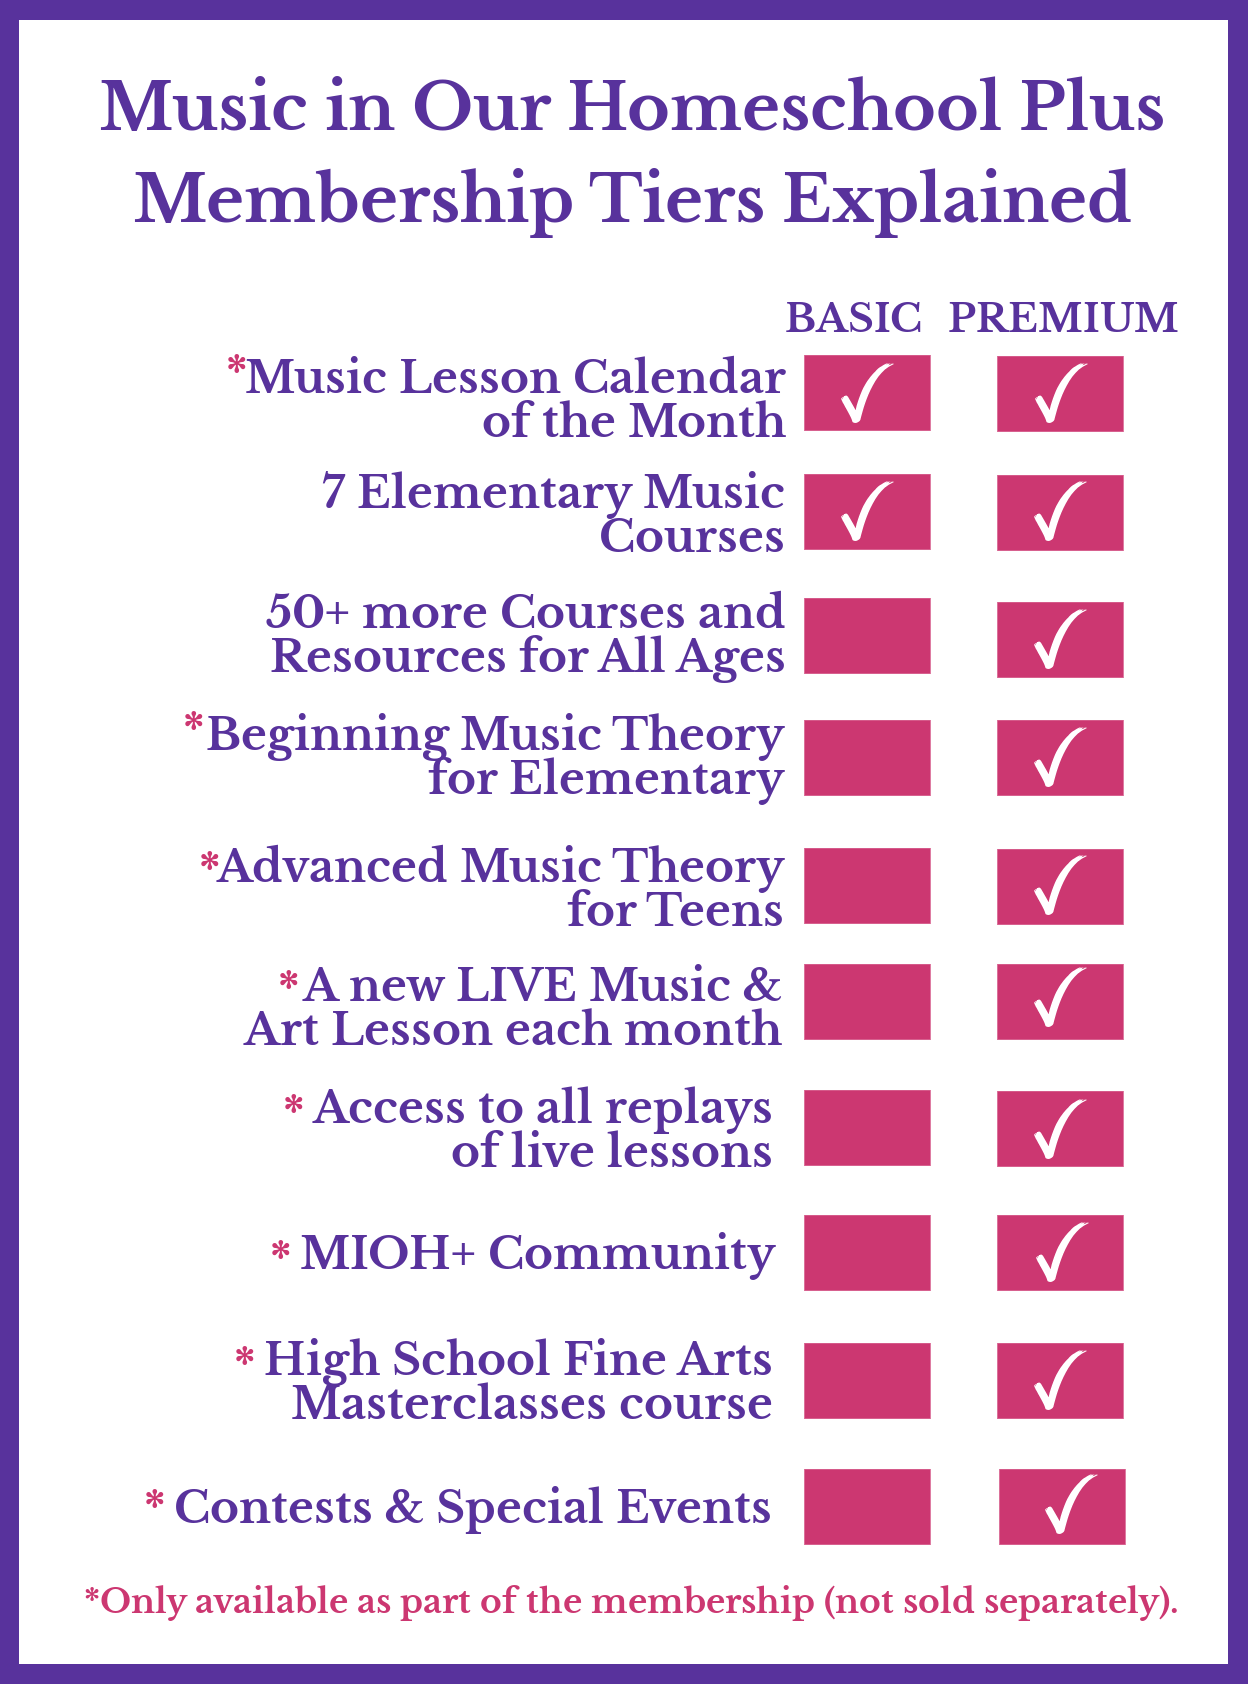 Music in Our Homeschool Plus is a music and fine arts membership for preschool through high school